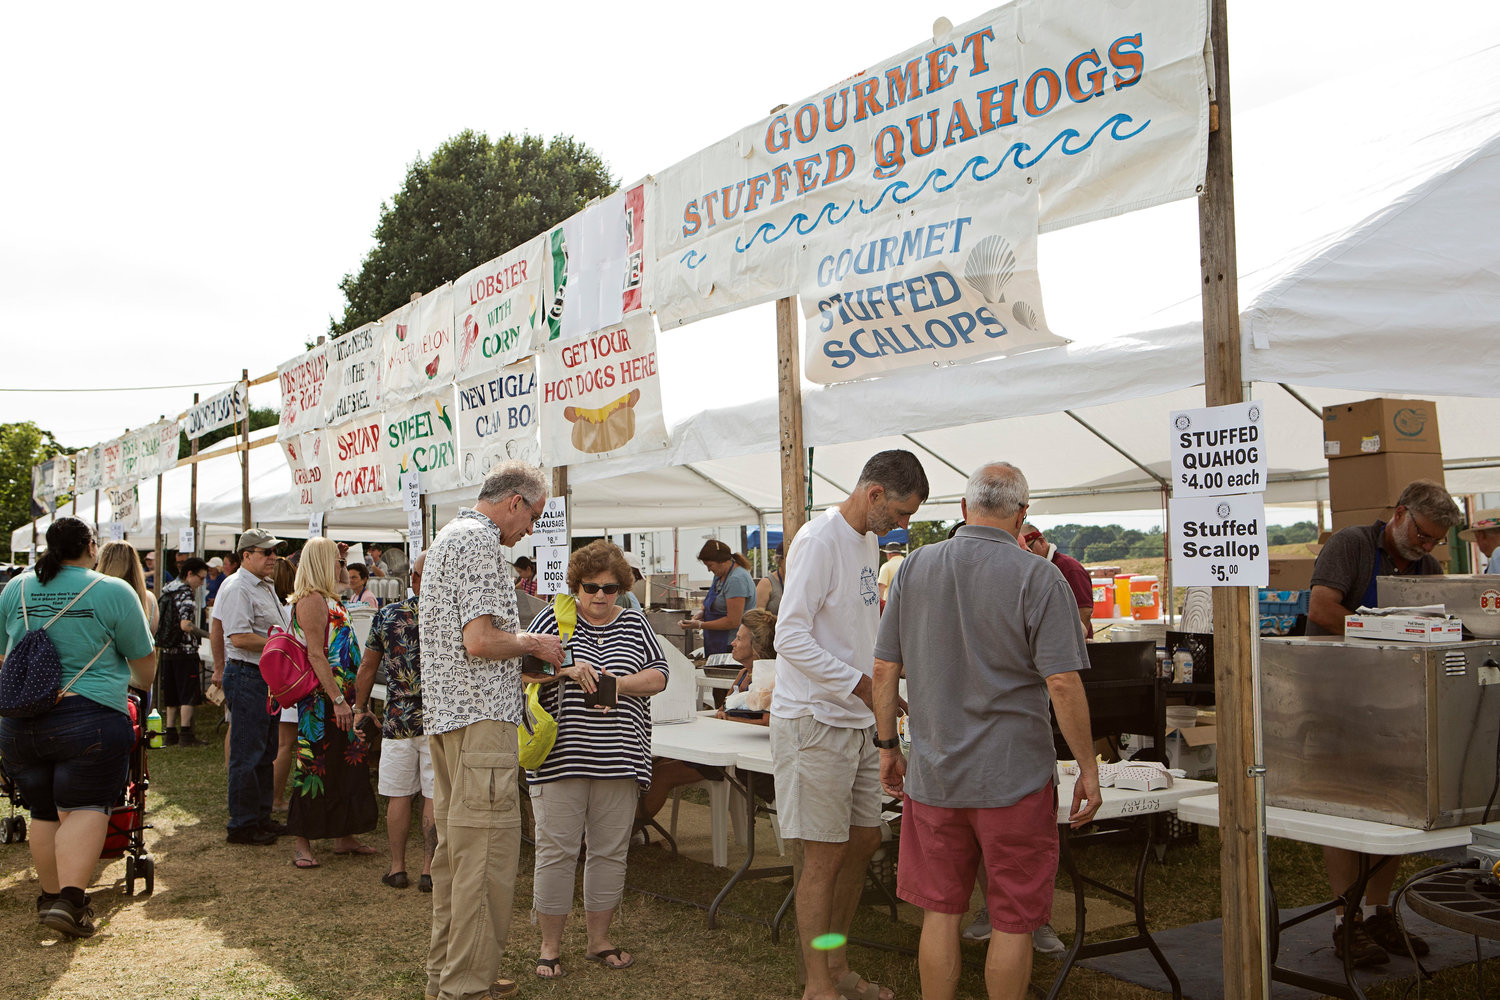 Heat is on the menu as Quahog Fest comes to Warren this weekend